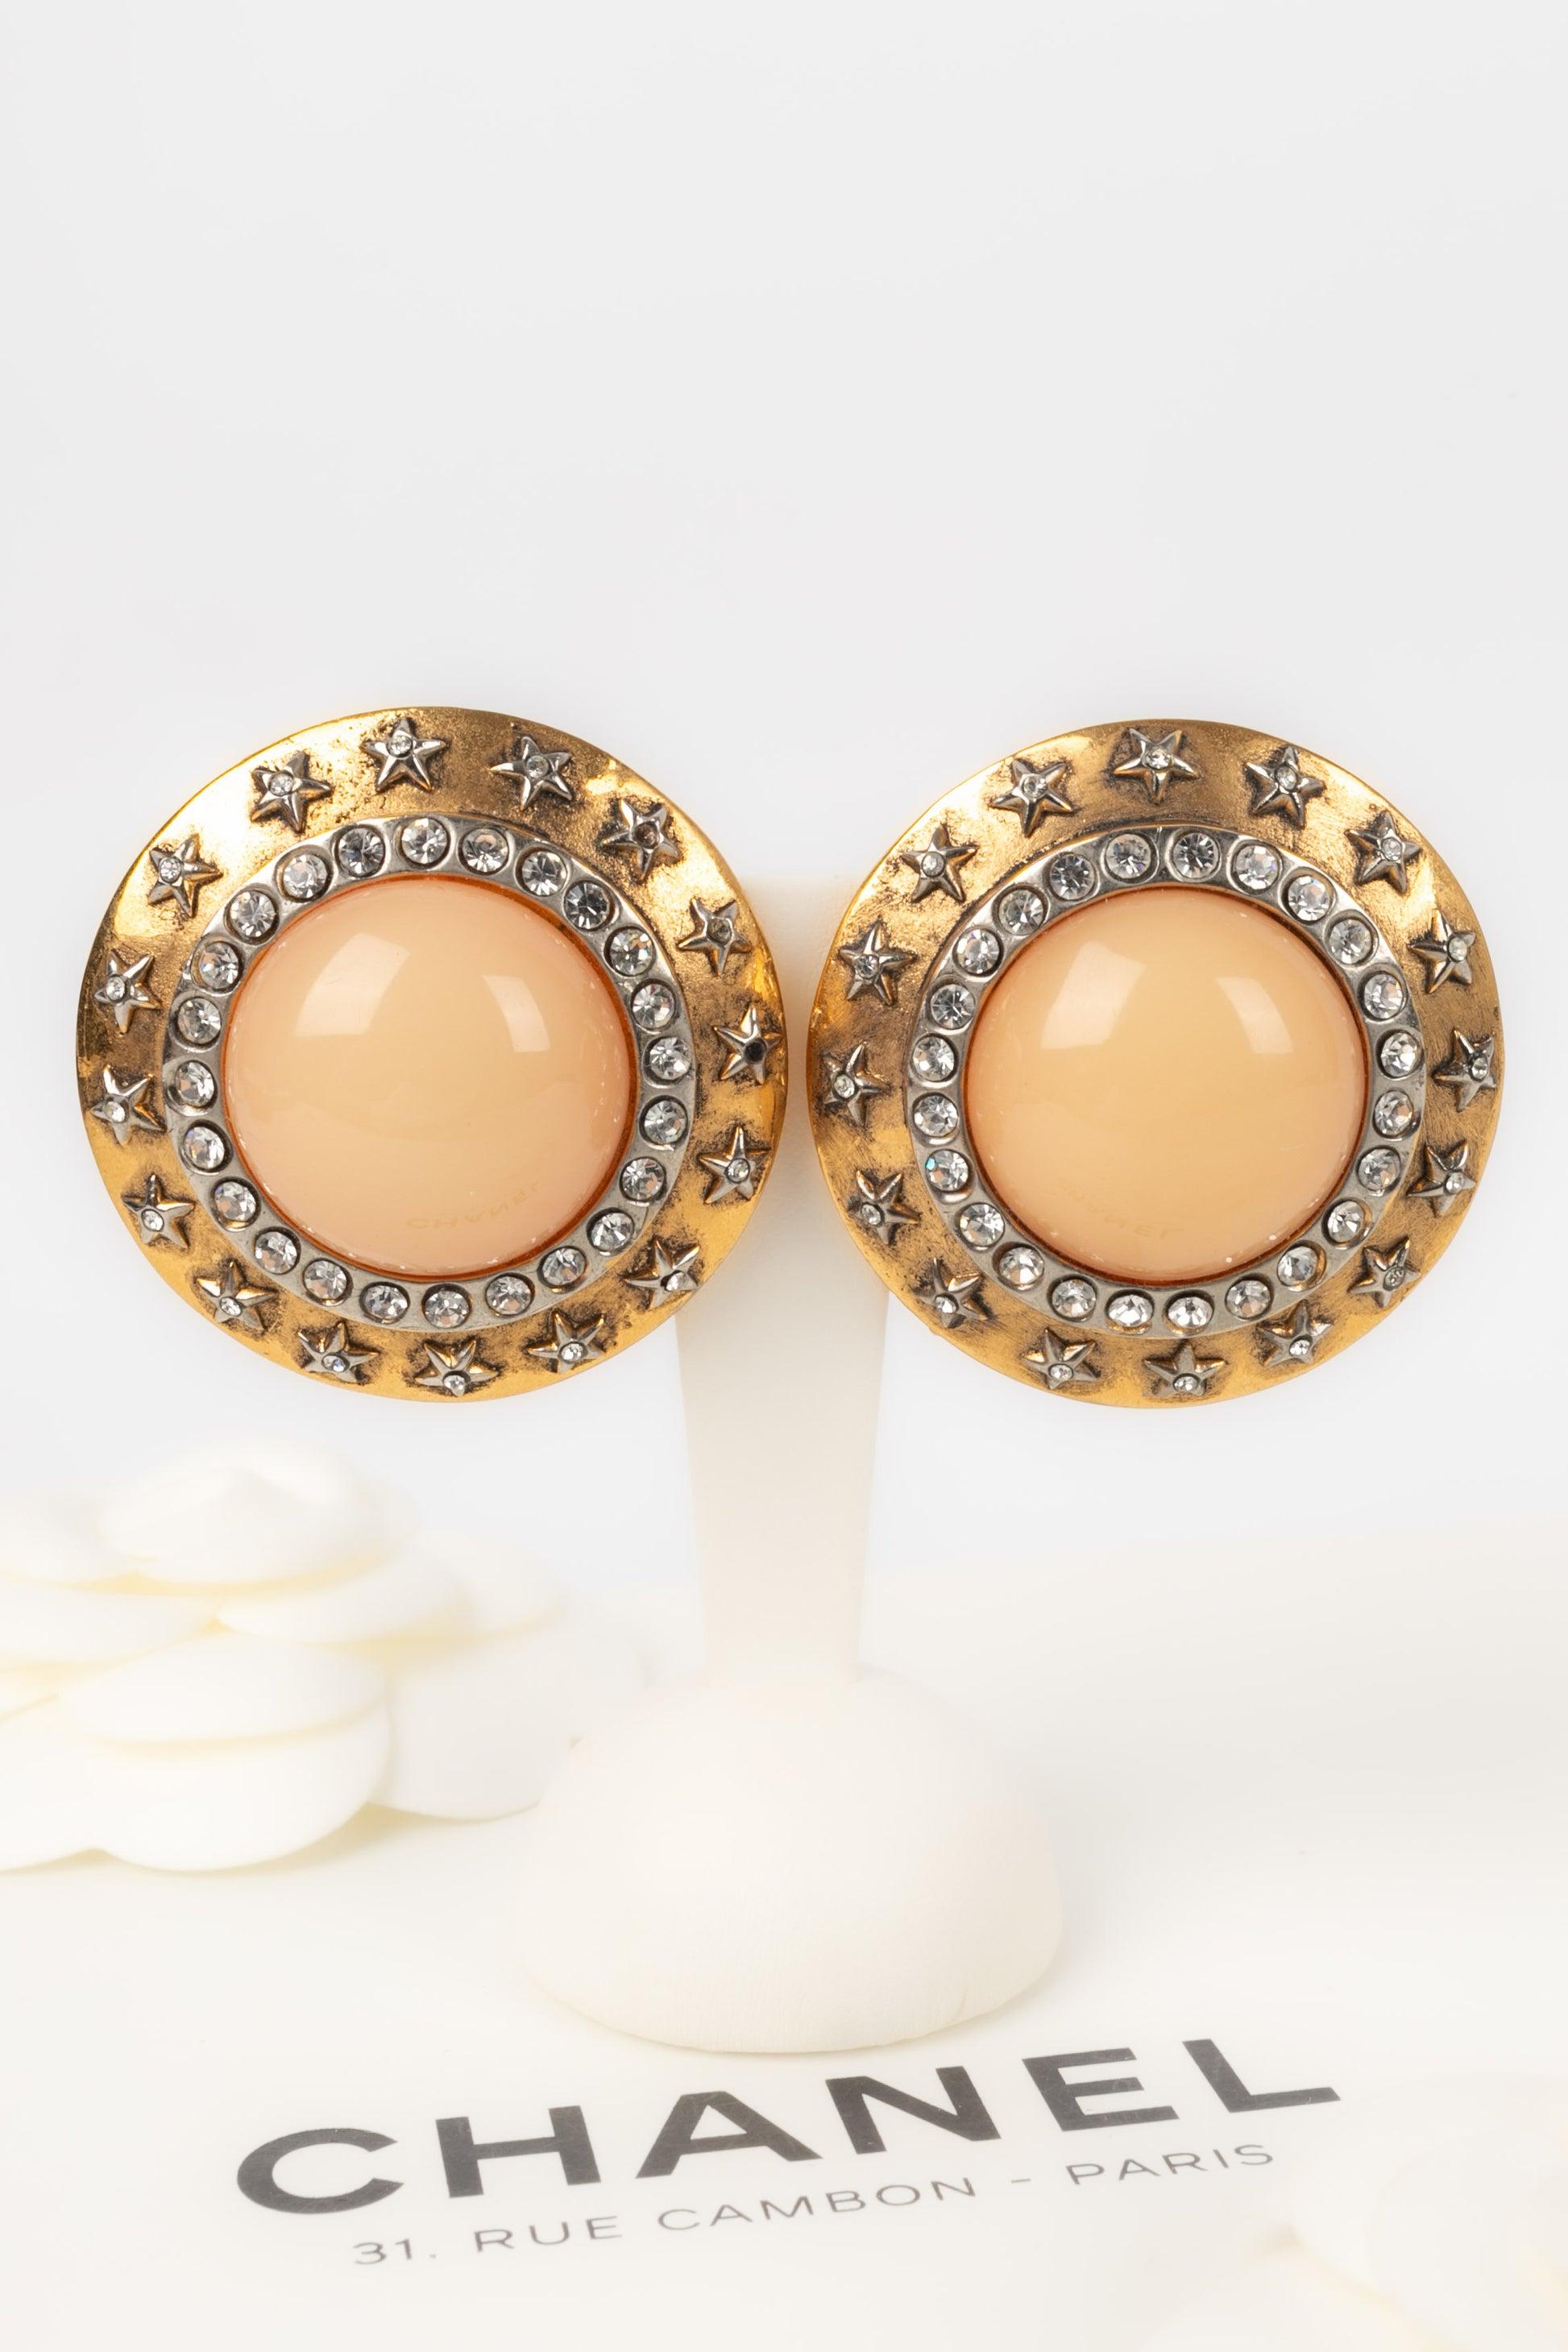 Chanel Round Clip-on Earrings in Golden Metal and Rhinestones For Sale 3